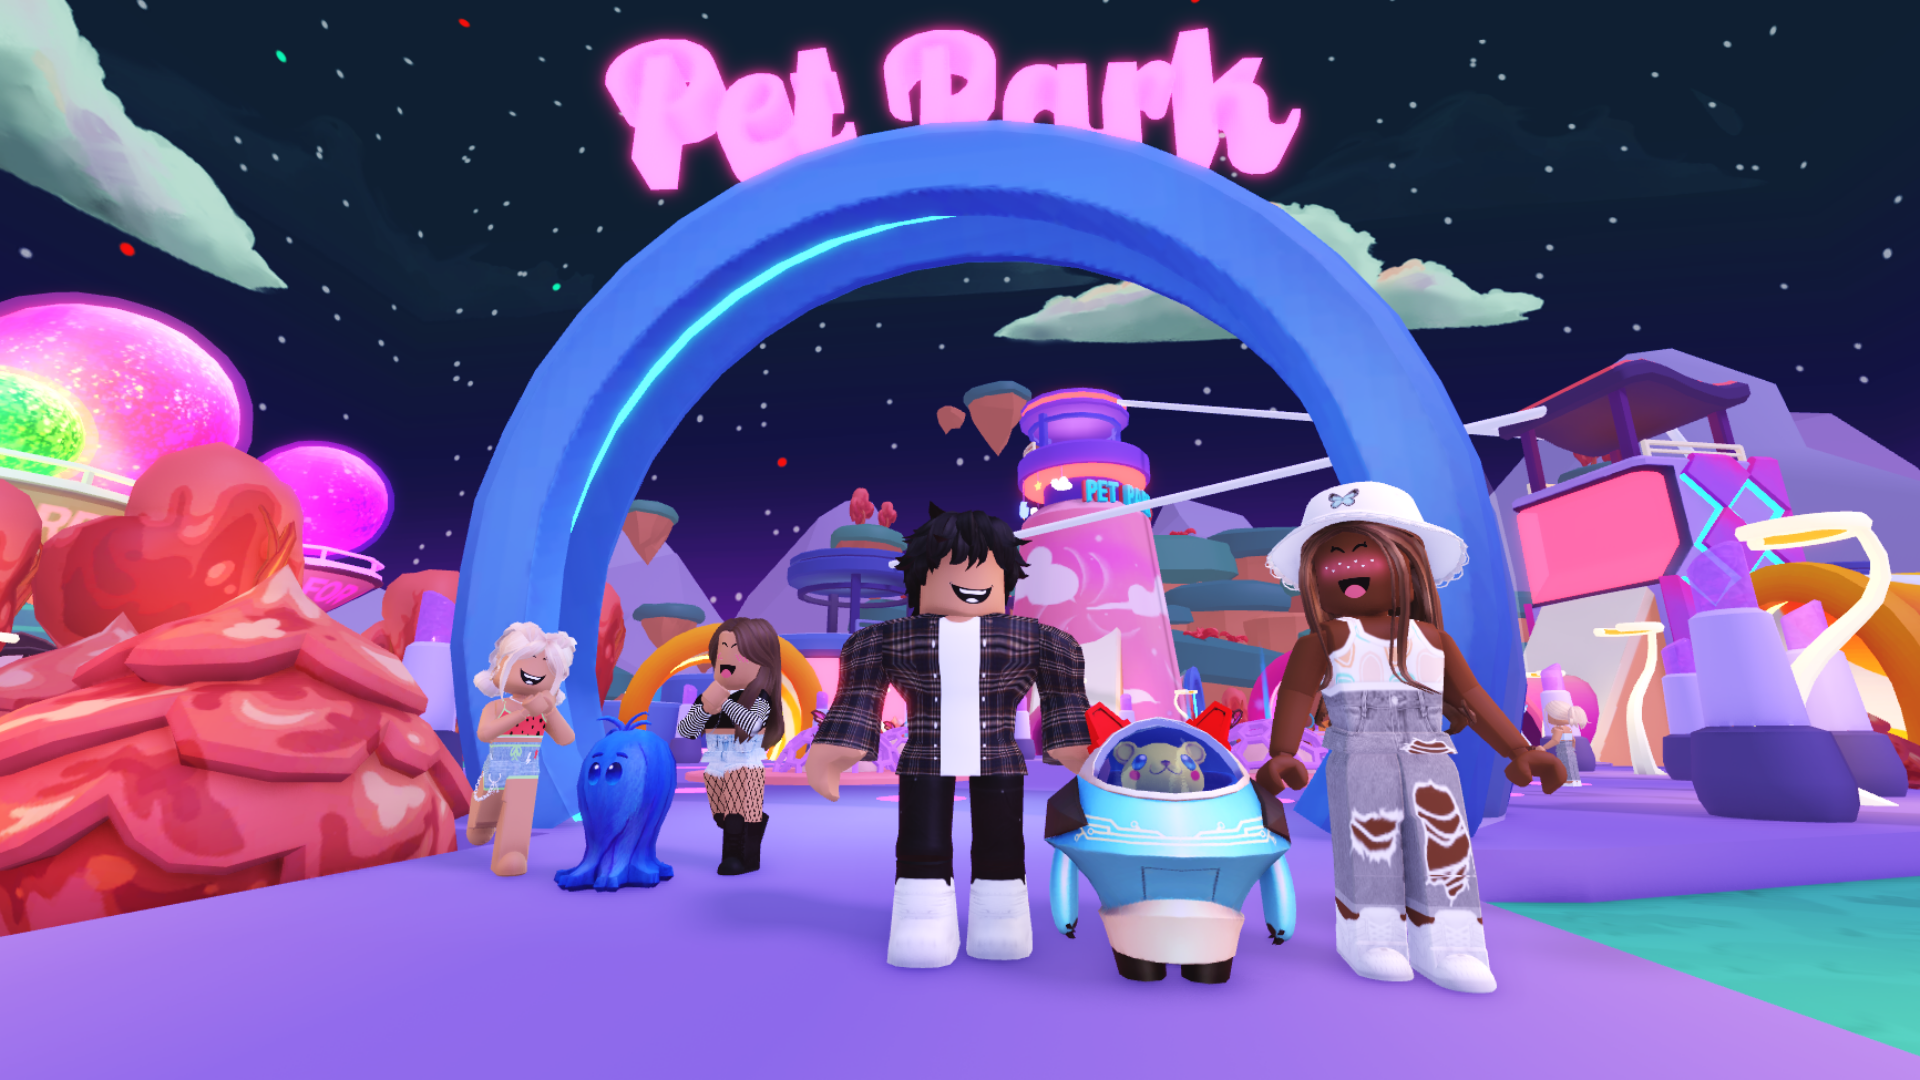 How retailers like Claire's and Walmart are going all in on Roblox